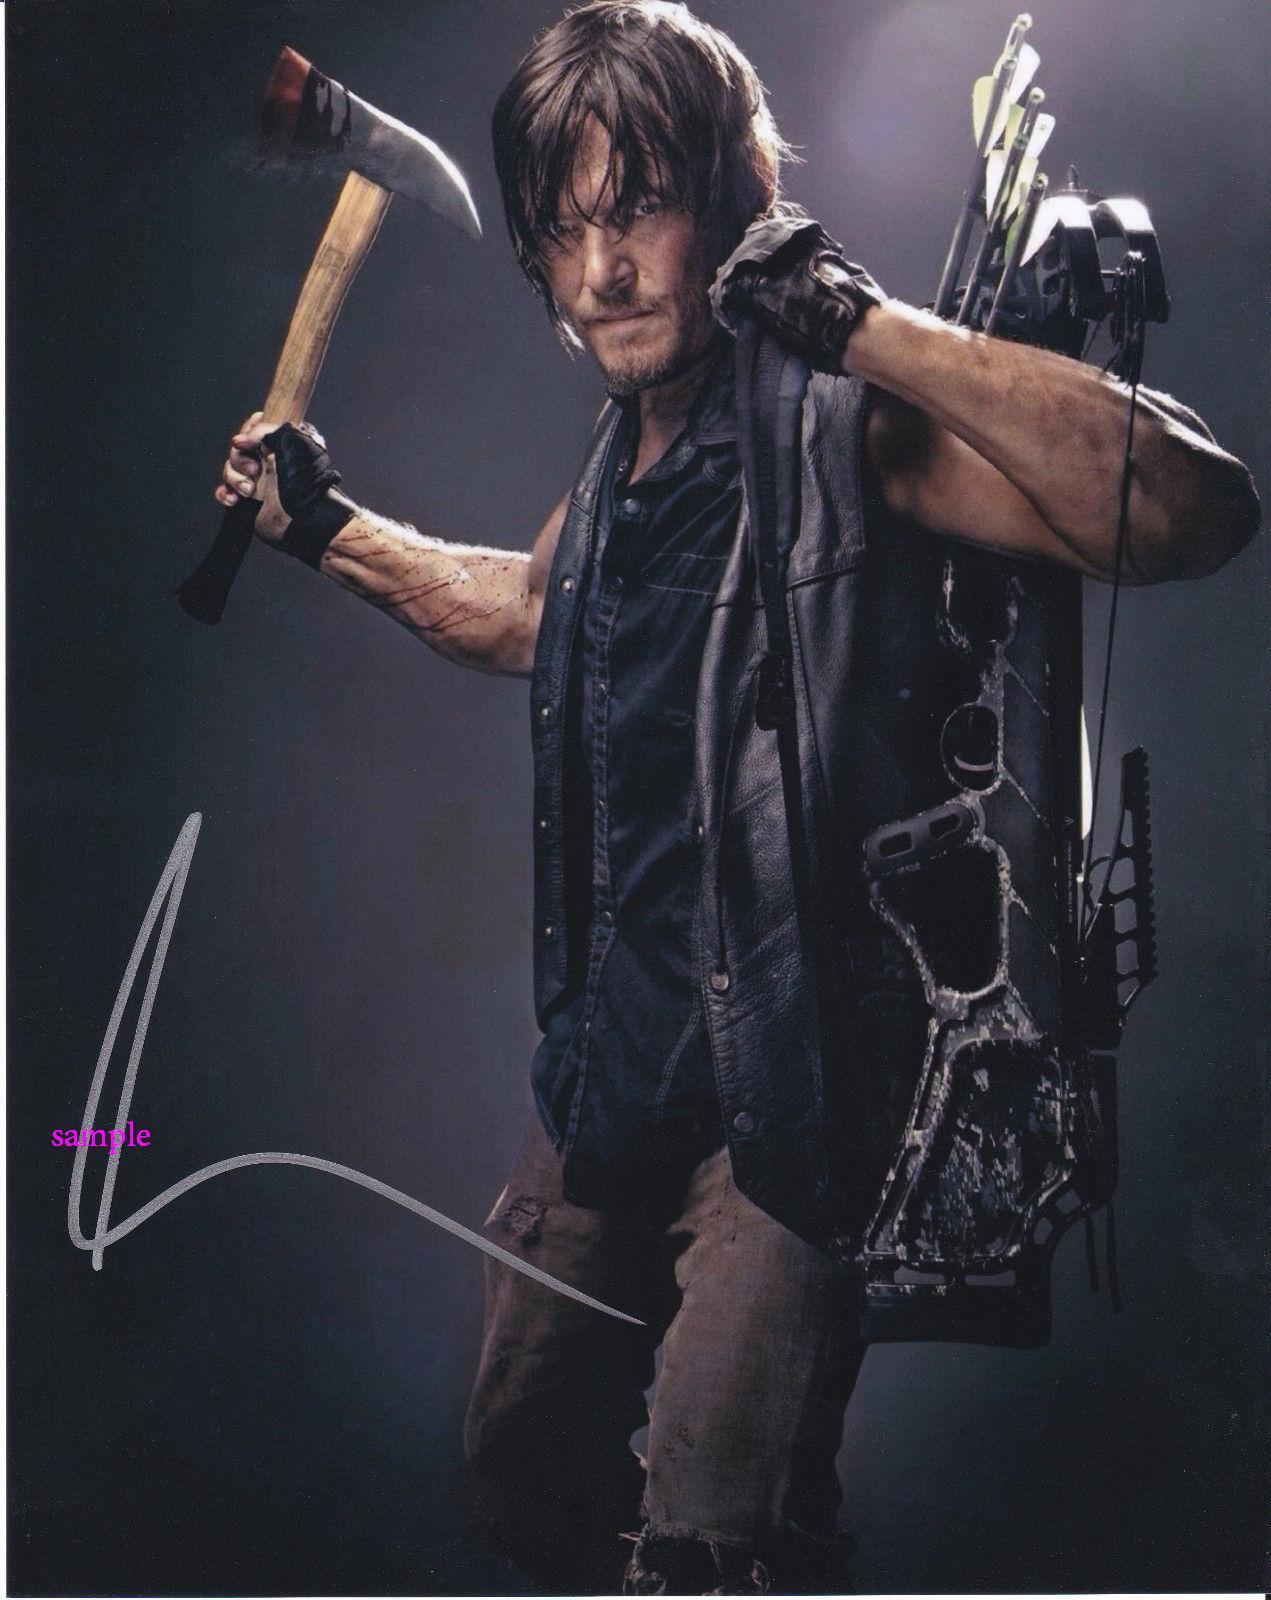 NORMAN REEDUS Oakland Mall REPRINT SIGNED 8X10 PICTURE CHRI AUTOGRAPHED Soldering PHOTO